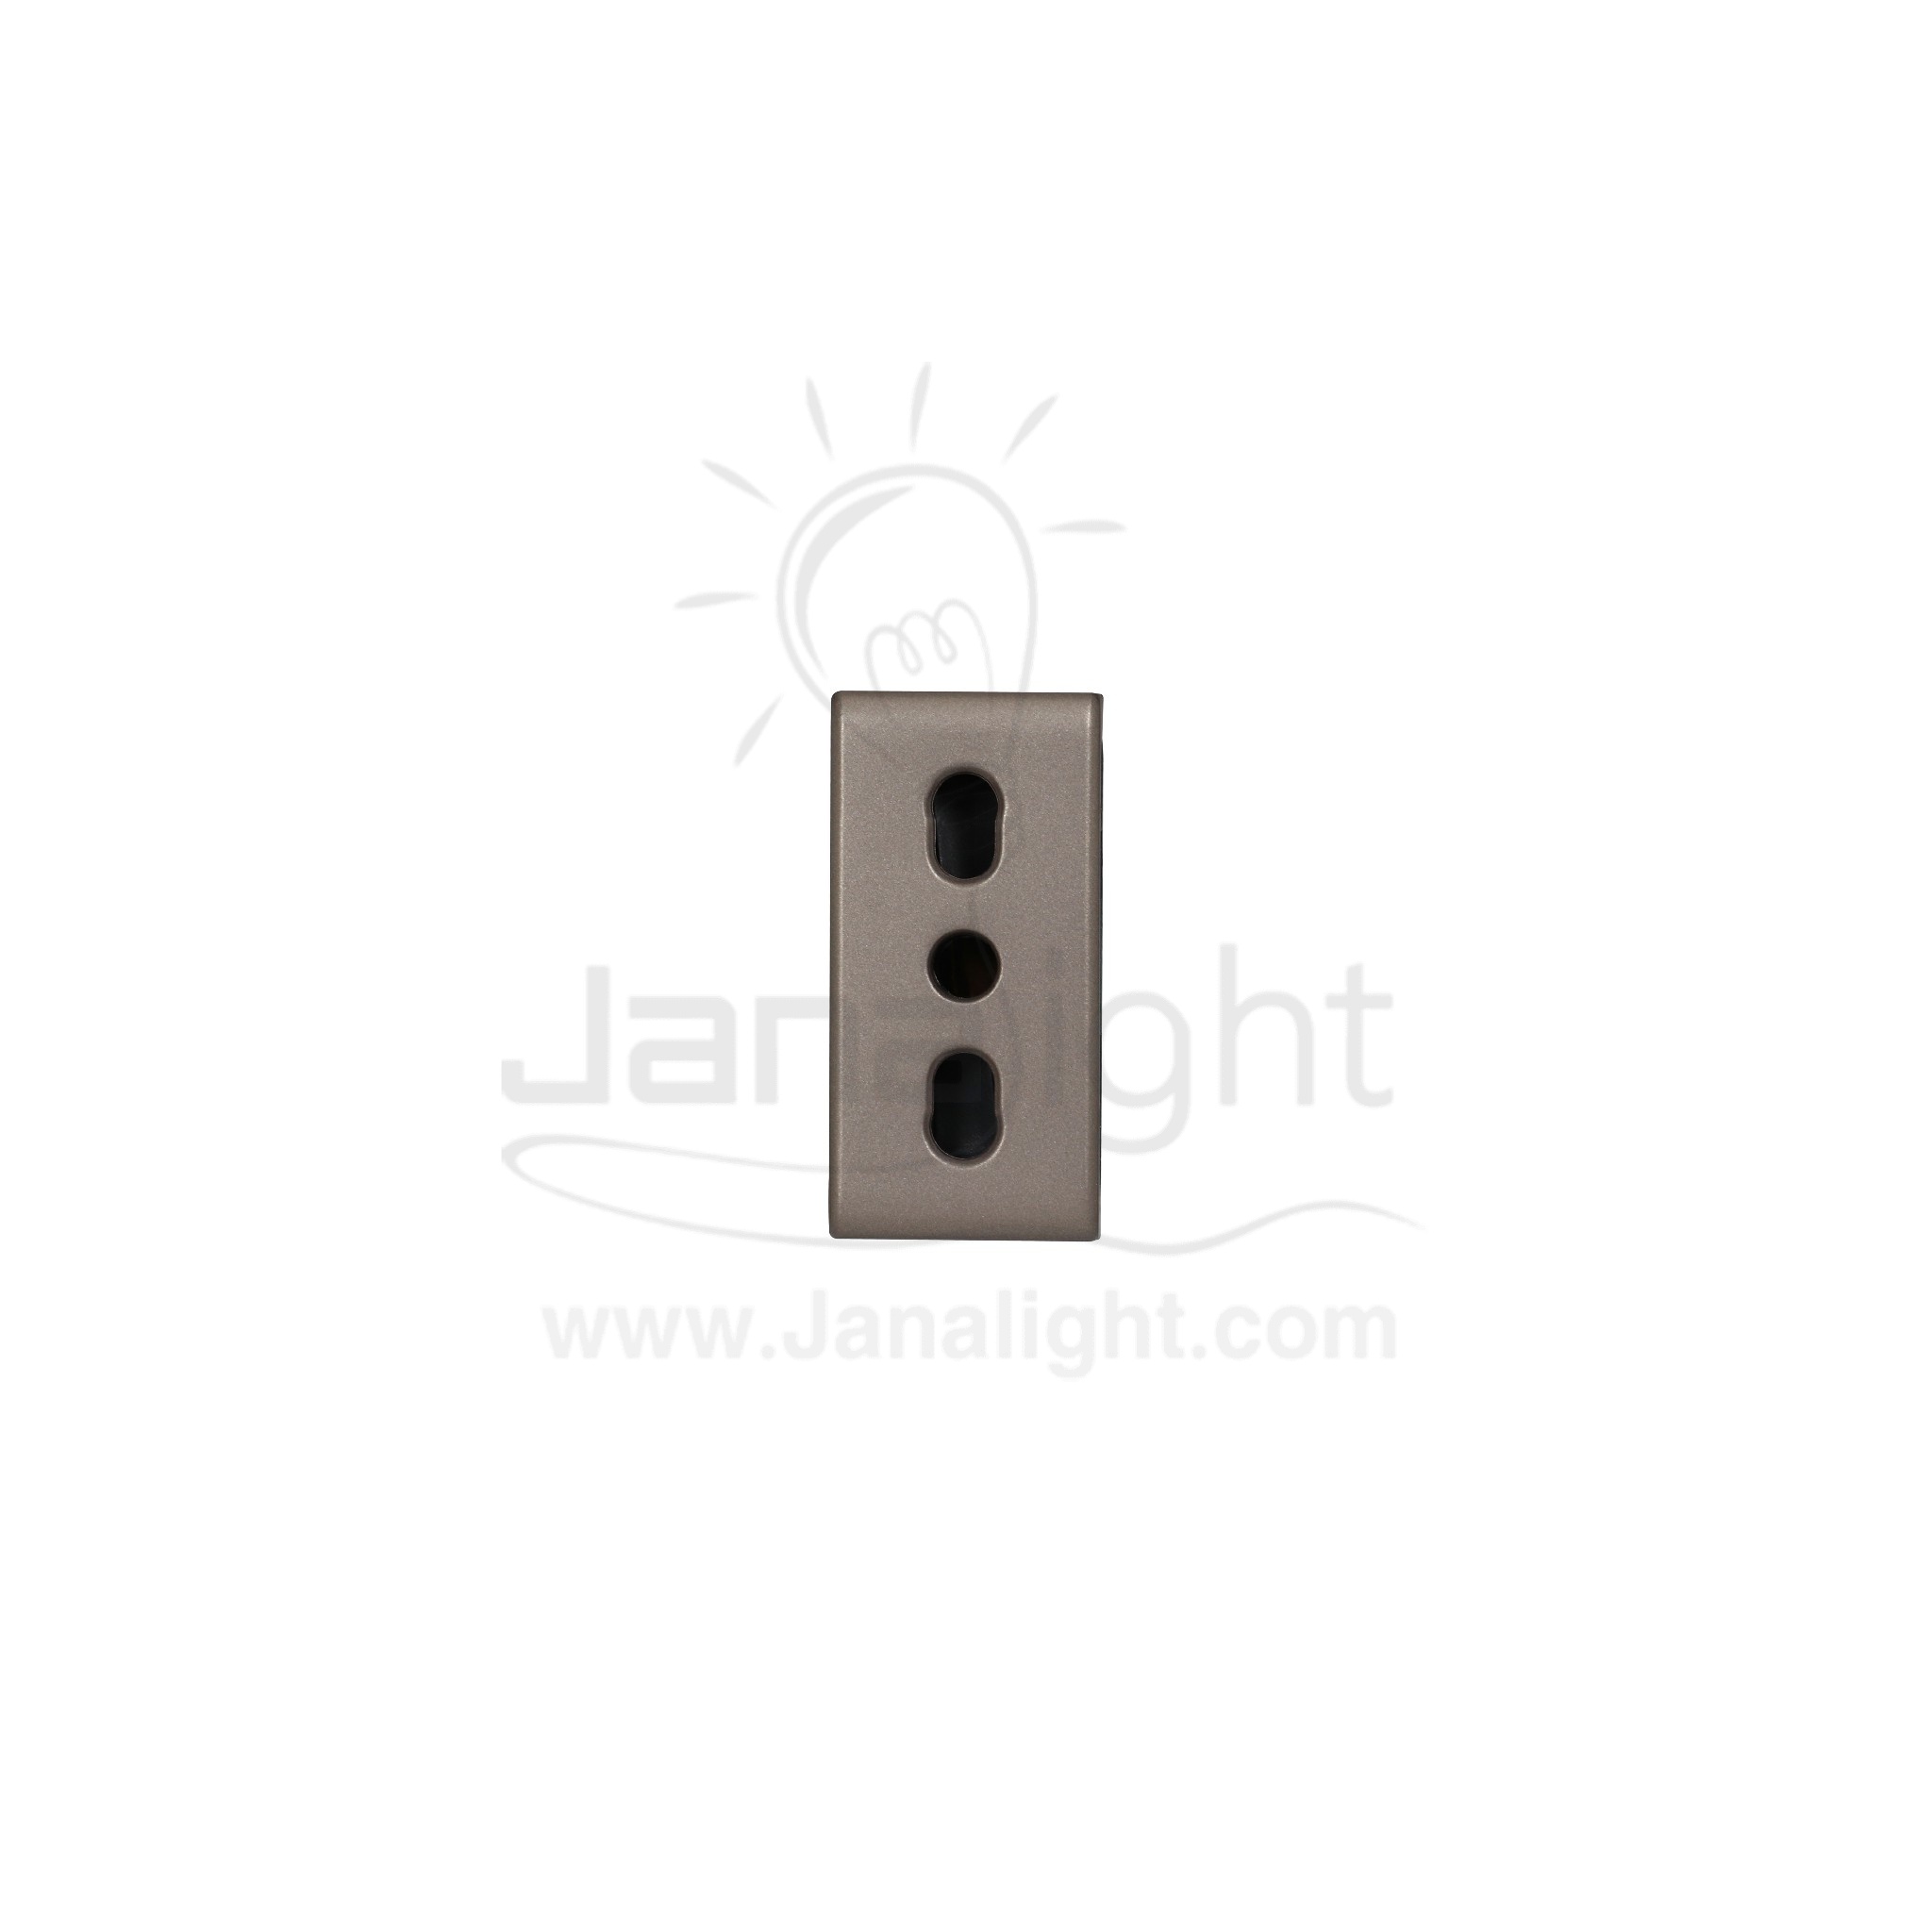 khind brown socket with earth pin|بريزة ايرث براون خيند